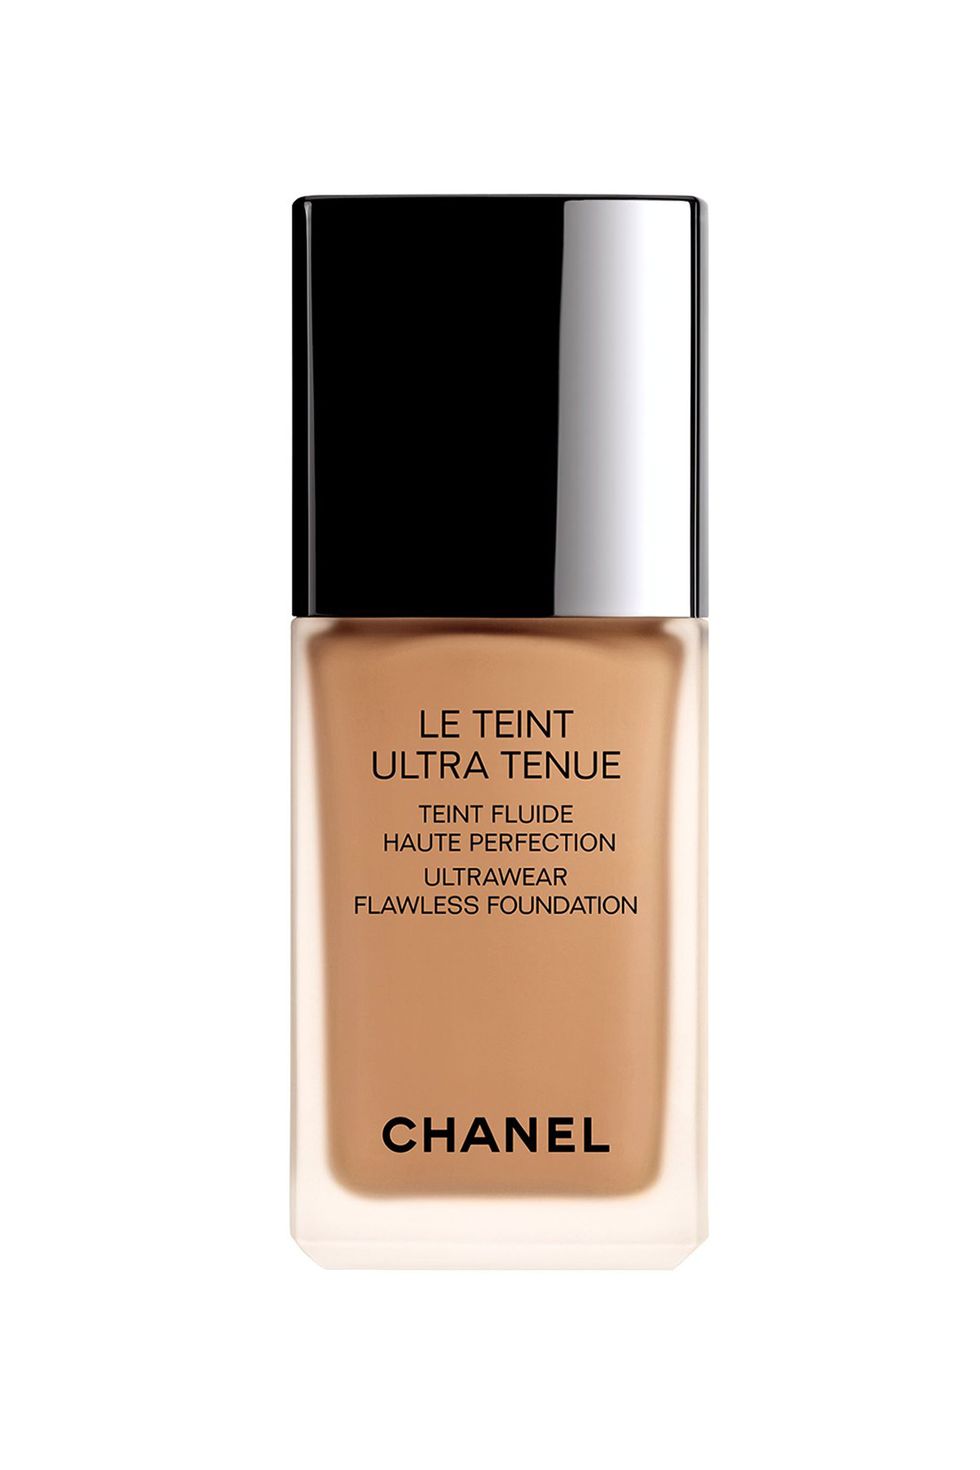 <p>The best foundations make those around you wonder whether&nbsp;you're just naturally blessed with impeccable "I woke up like this" skin. This formula from Chanel delivers. A light-diffusing complex offers real-looking radiance, and amino-acid-covered pigments make the makeup&nbsp;virtually invisible to the naked eye. </p><p>$60, <a href="http://www.chanel.com/en_US/fragrance-beauty/le-teint-ultra-tenue-141175" target="_blank">chanel.com</a></p>